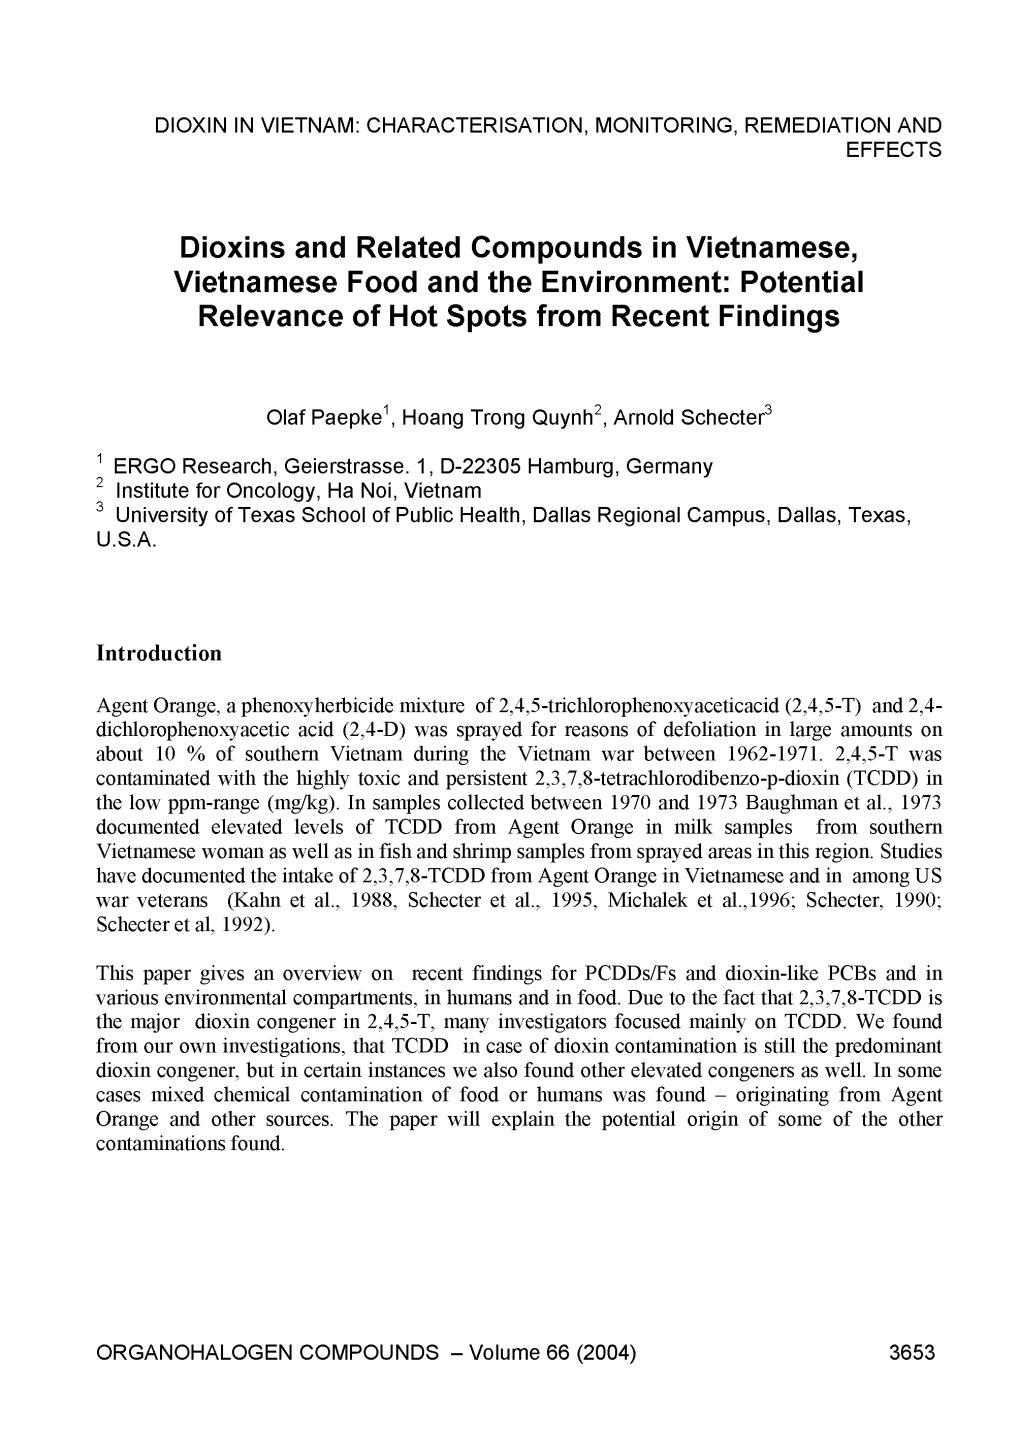 Dioxins and Related Compounds in Vietnamese, Vietnamese Food and the Environment: Potential Relevance of Hot Spots from Recent Findings